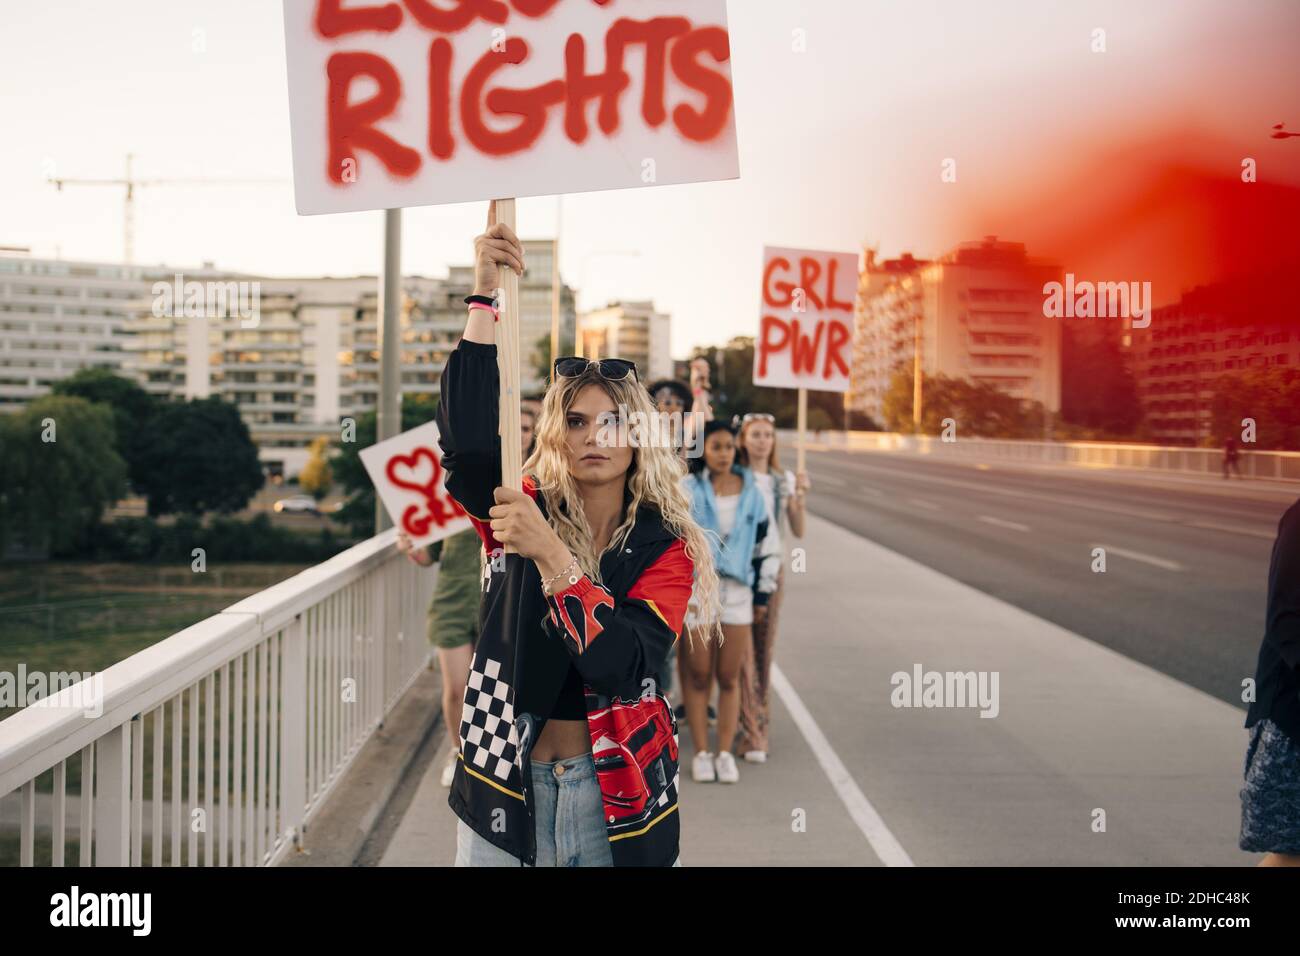 Women with posters marching for equal rights against sky in city Stock Photo